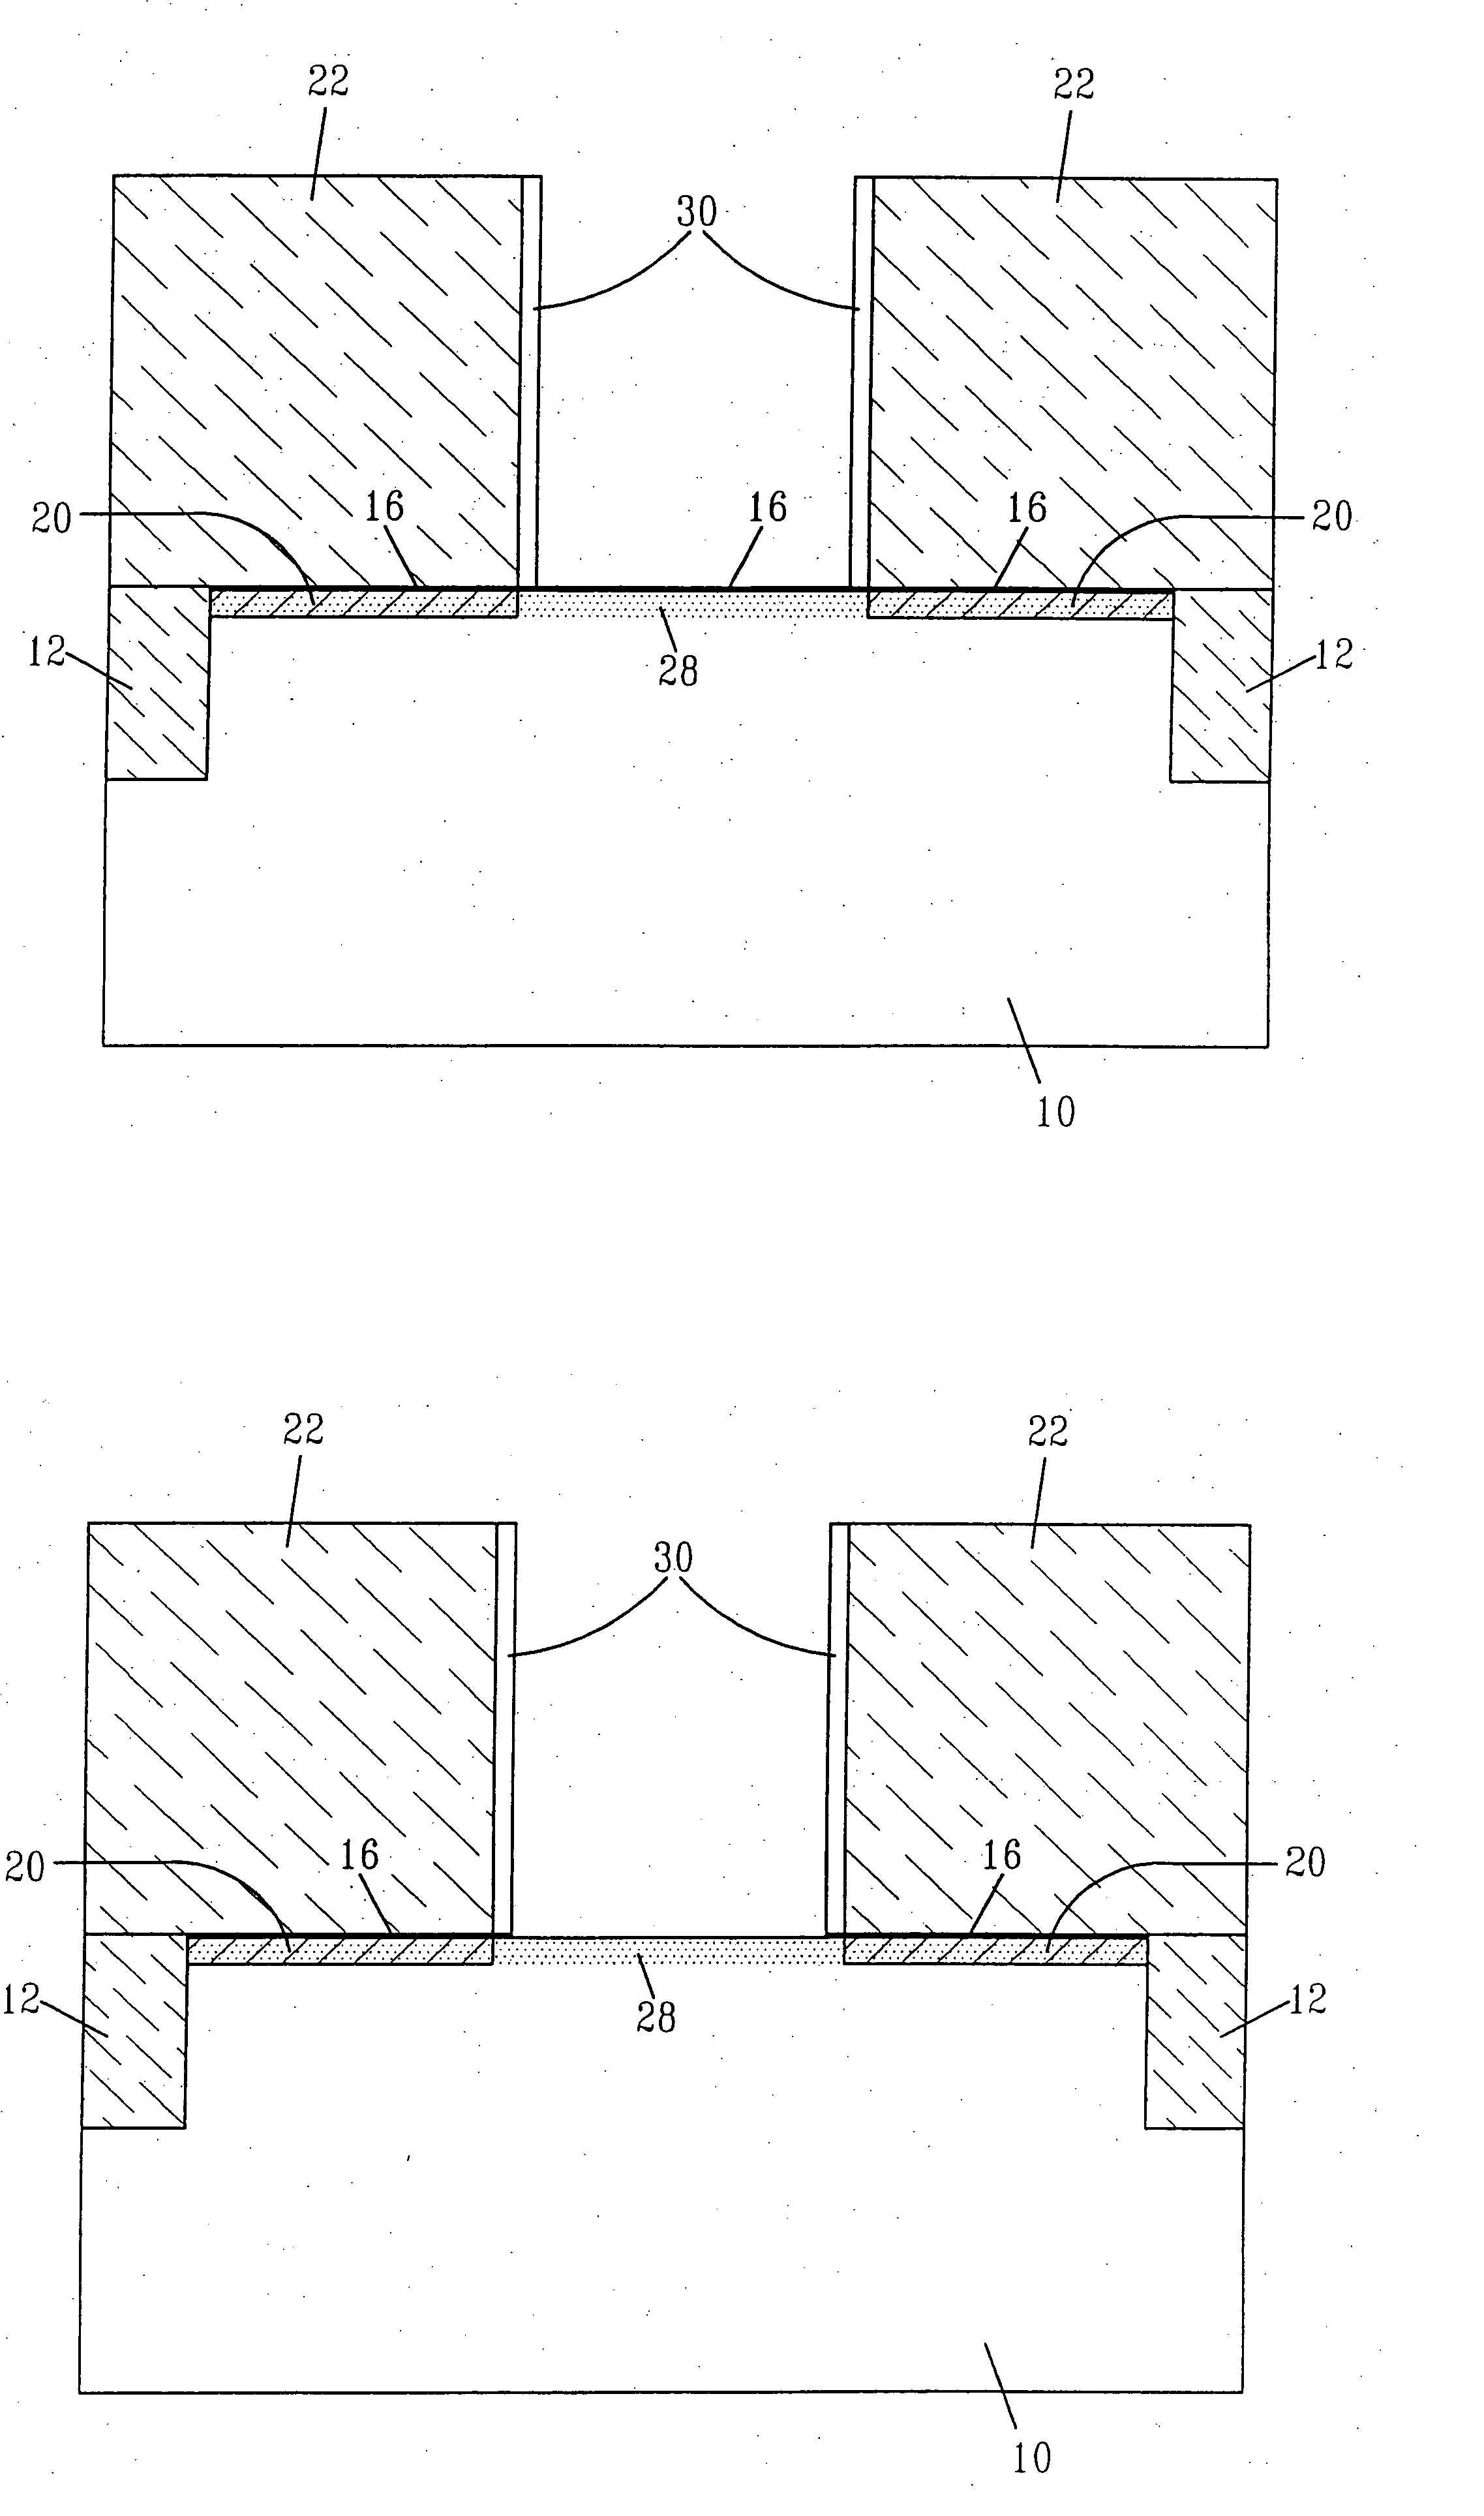 Low resistance T-gate MOSFET device using a damascene gate process and an innovative oxide removal etch